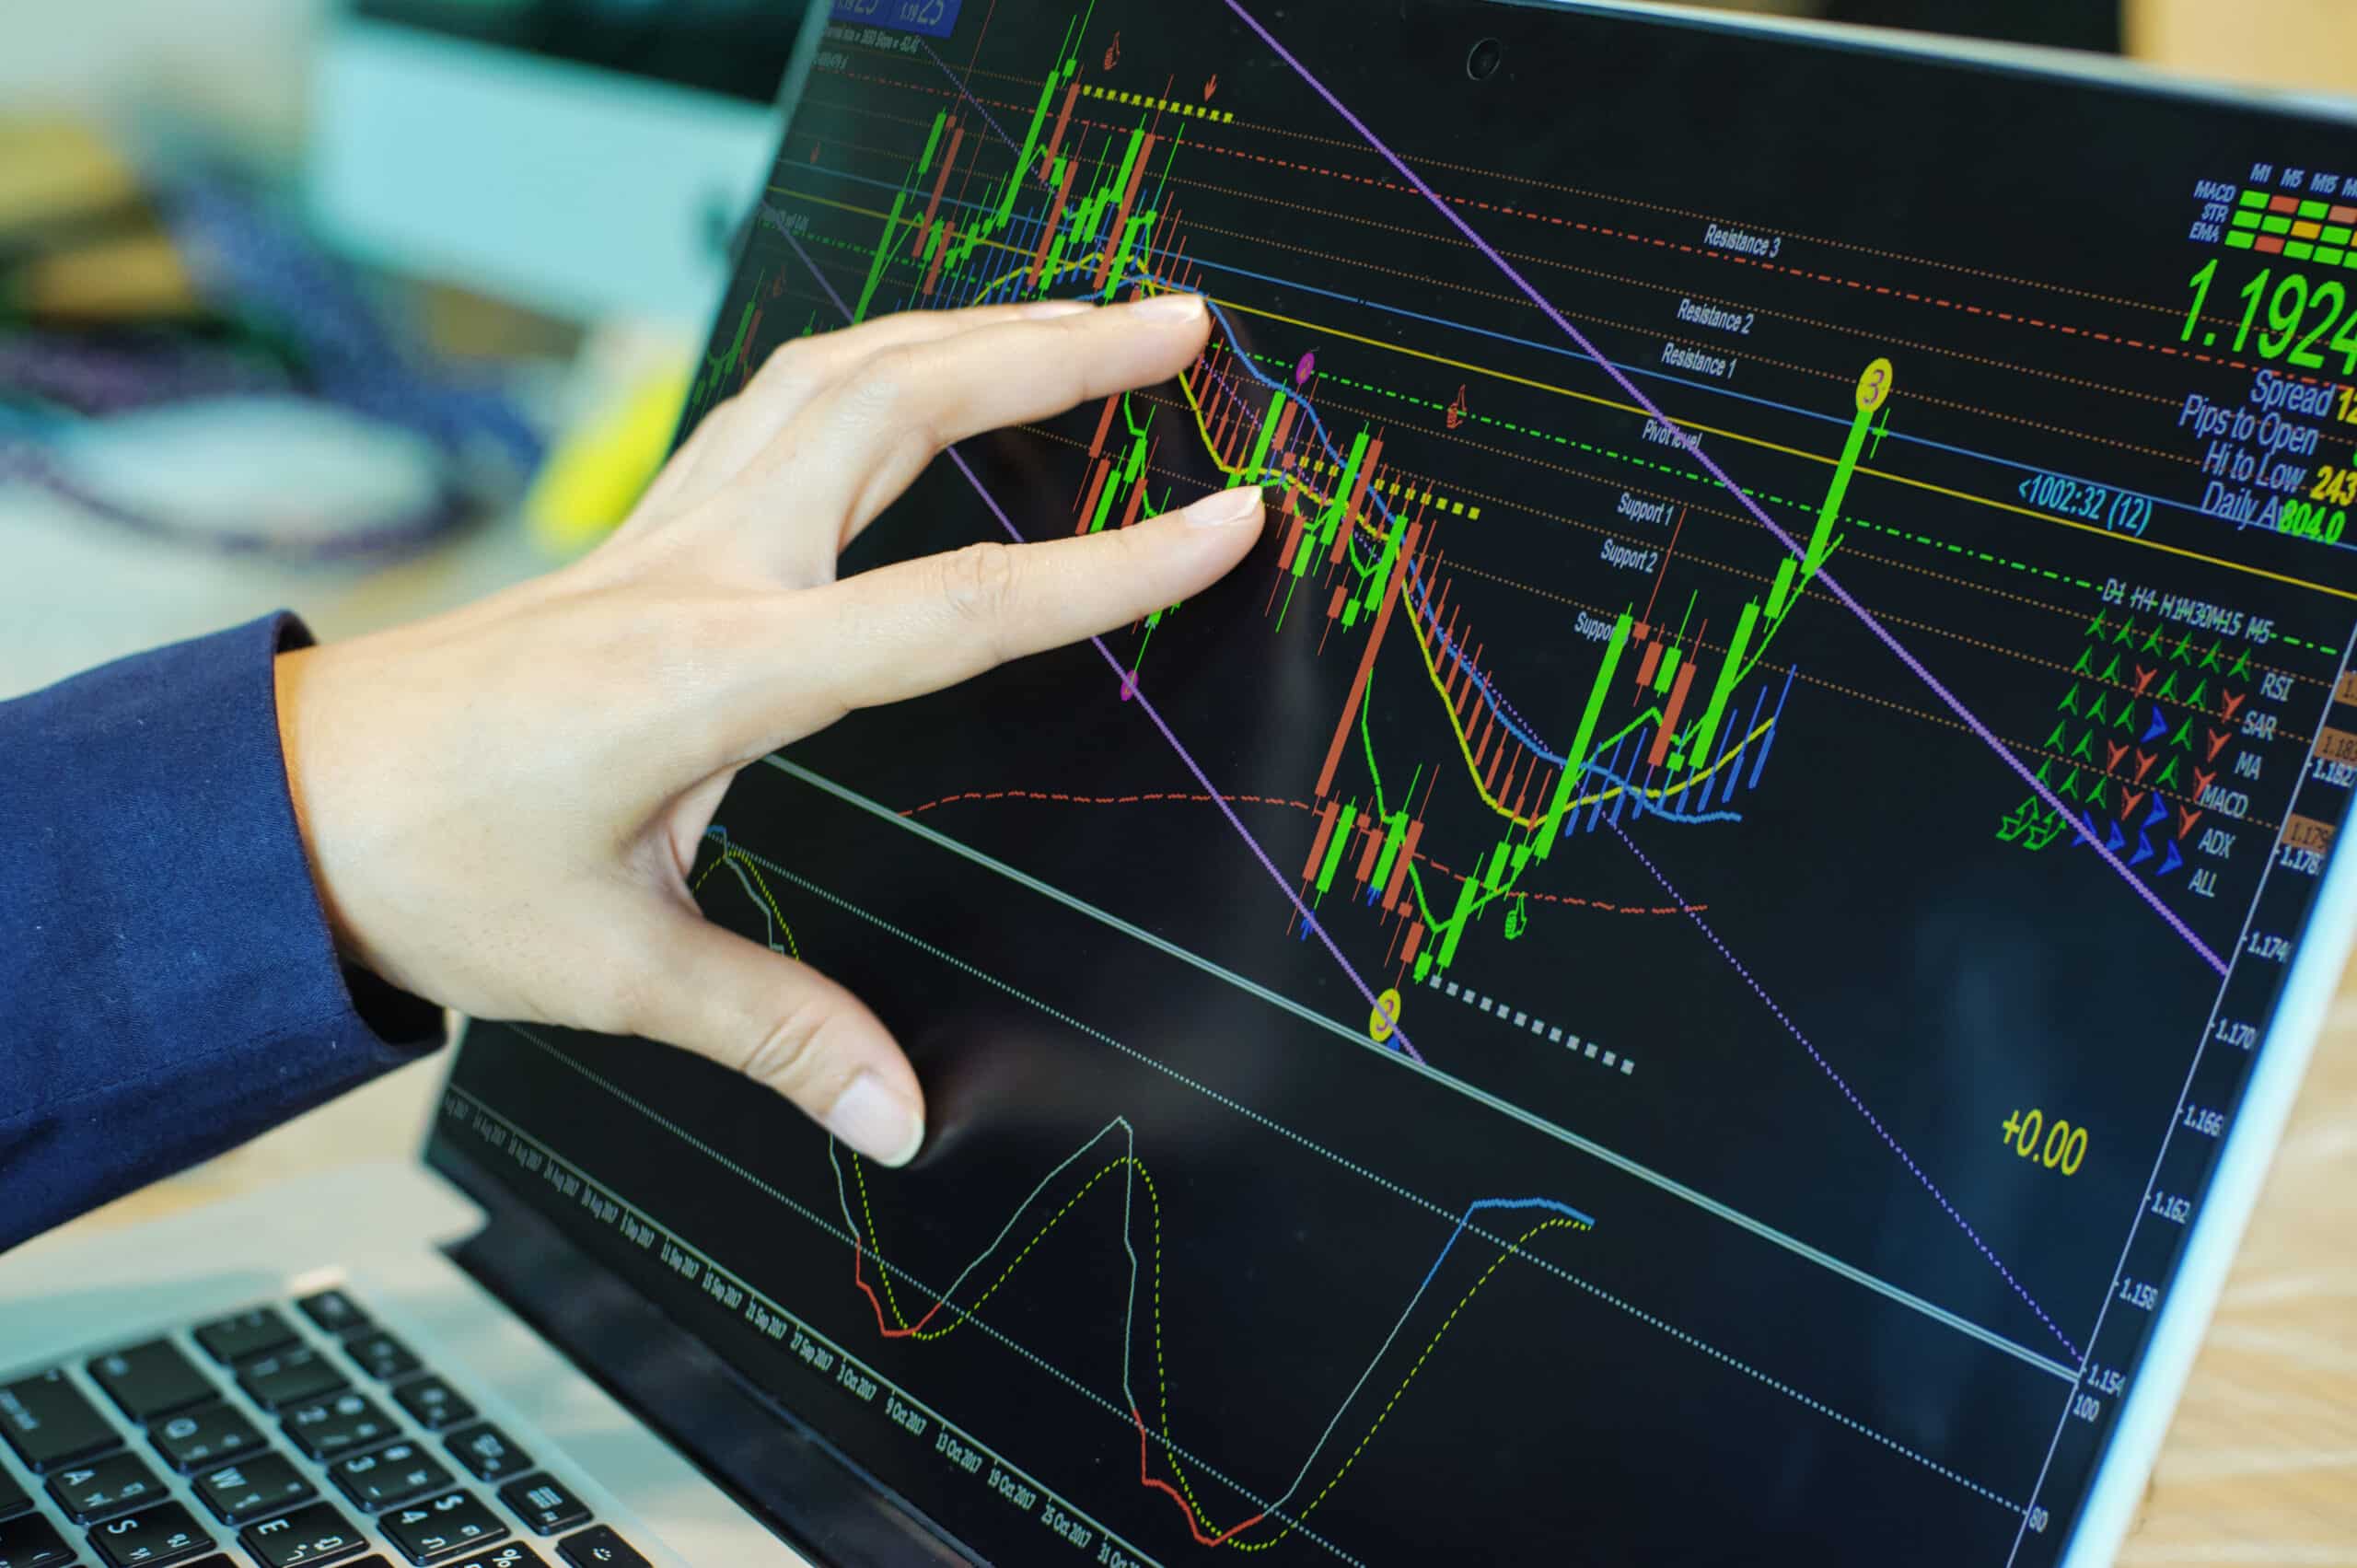 Basics of Technical Analysis for Crypto Trading Explained Clearly